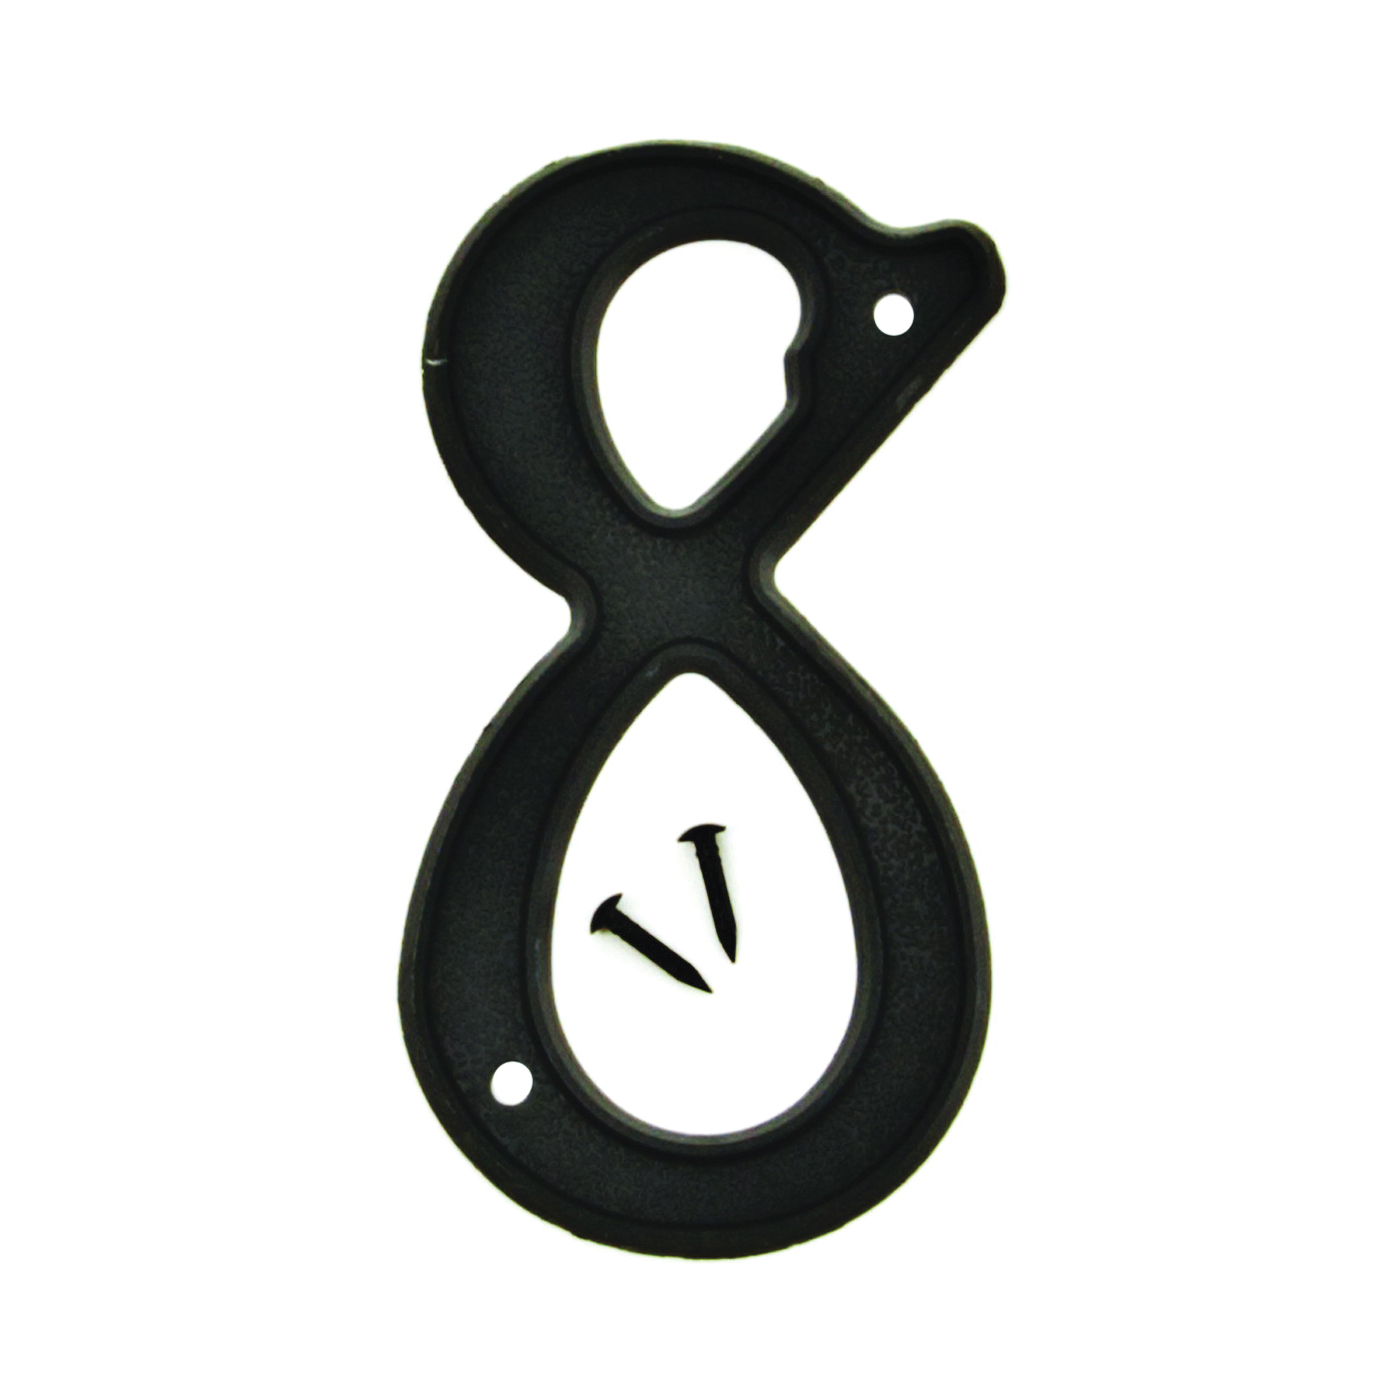 PN-29/8 House Number, Character: 8, 4 in H Character, Black Character, Plastic